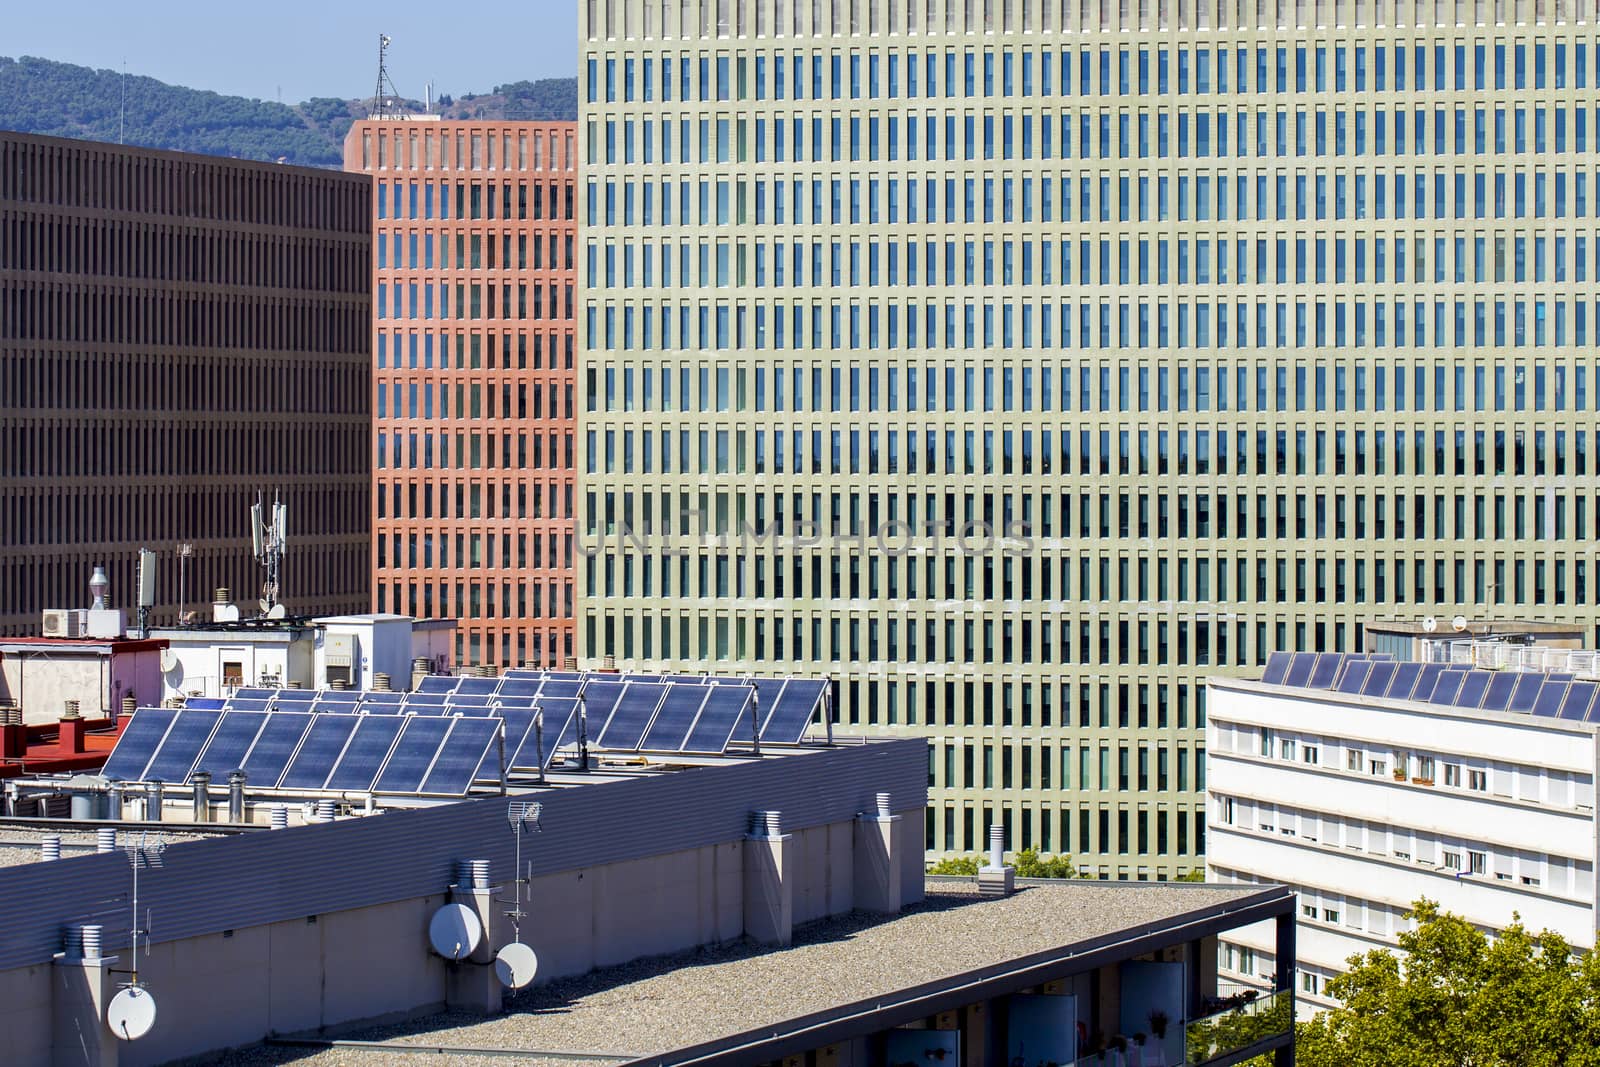 New residential buildings in Spain with solar panels on the roof to save energy. The facades of modern office buildings are visible behind.